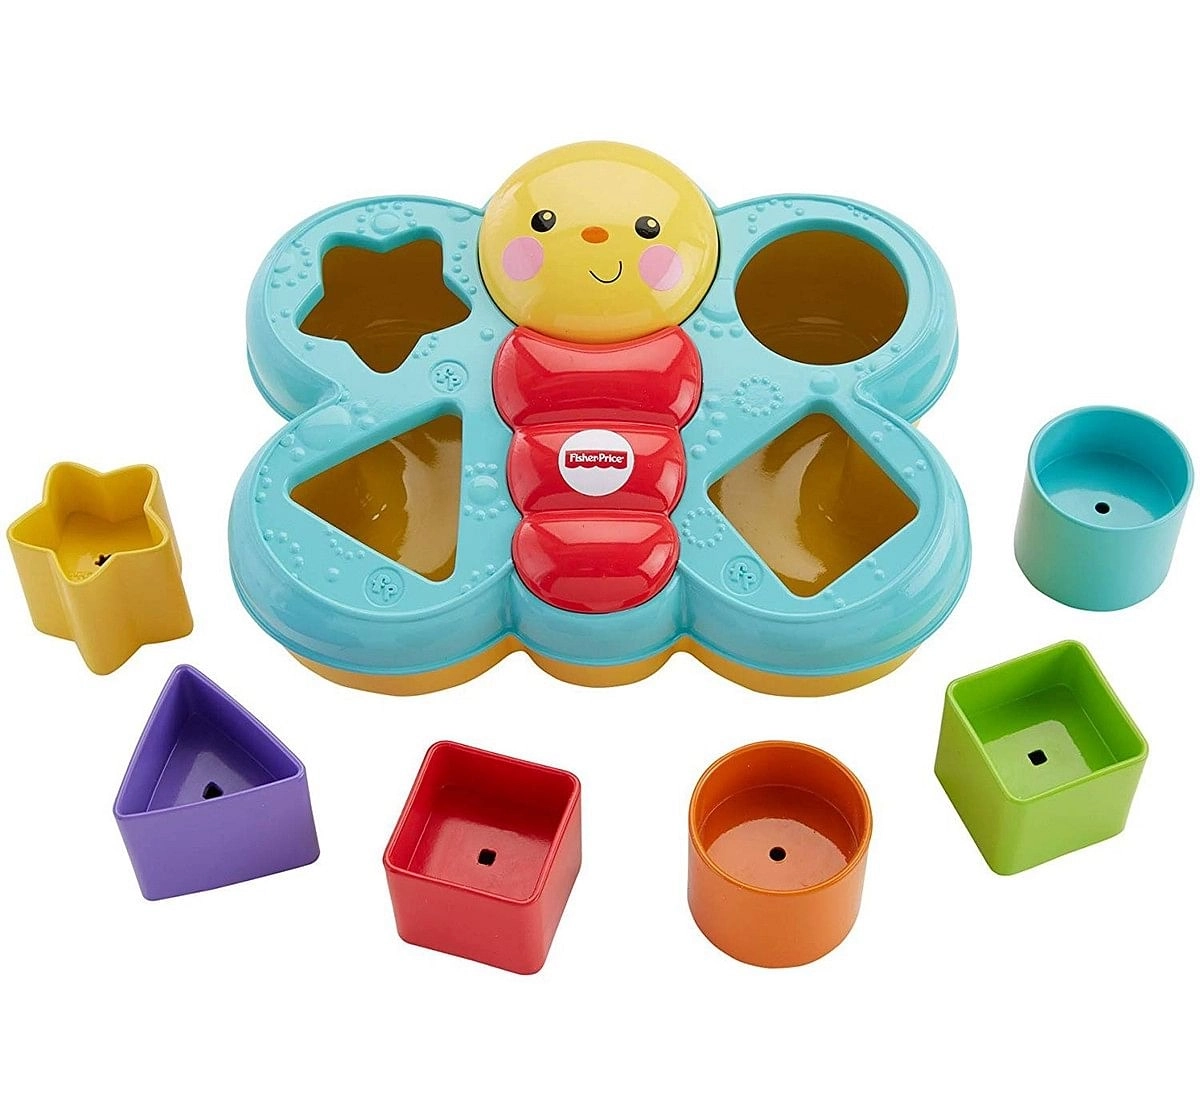 Fisher Price Sort N Spill Butterfly Activity Toys for Kids age 6M+ 